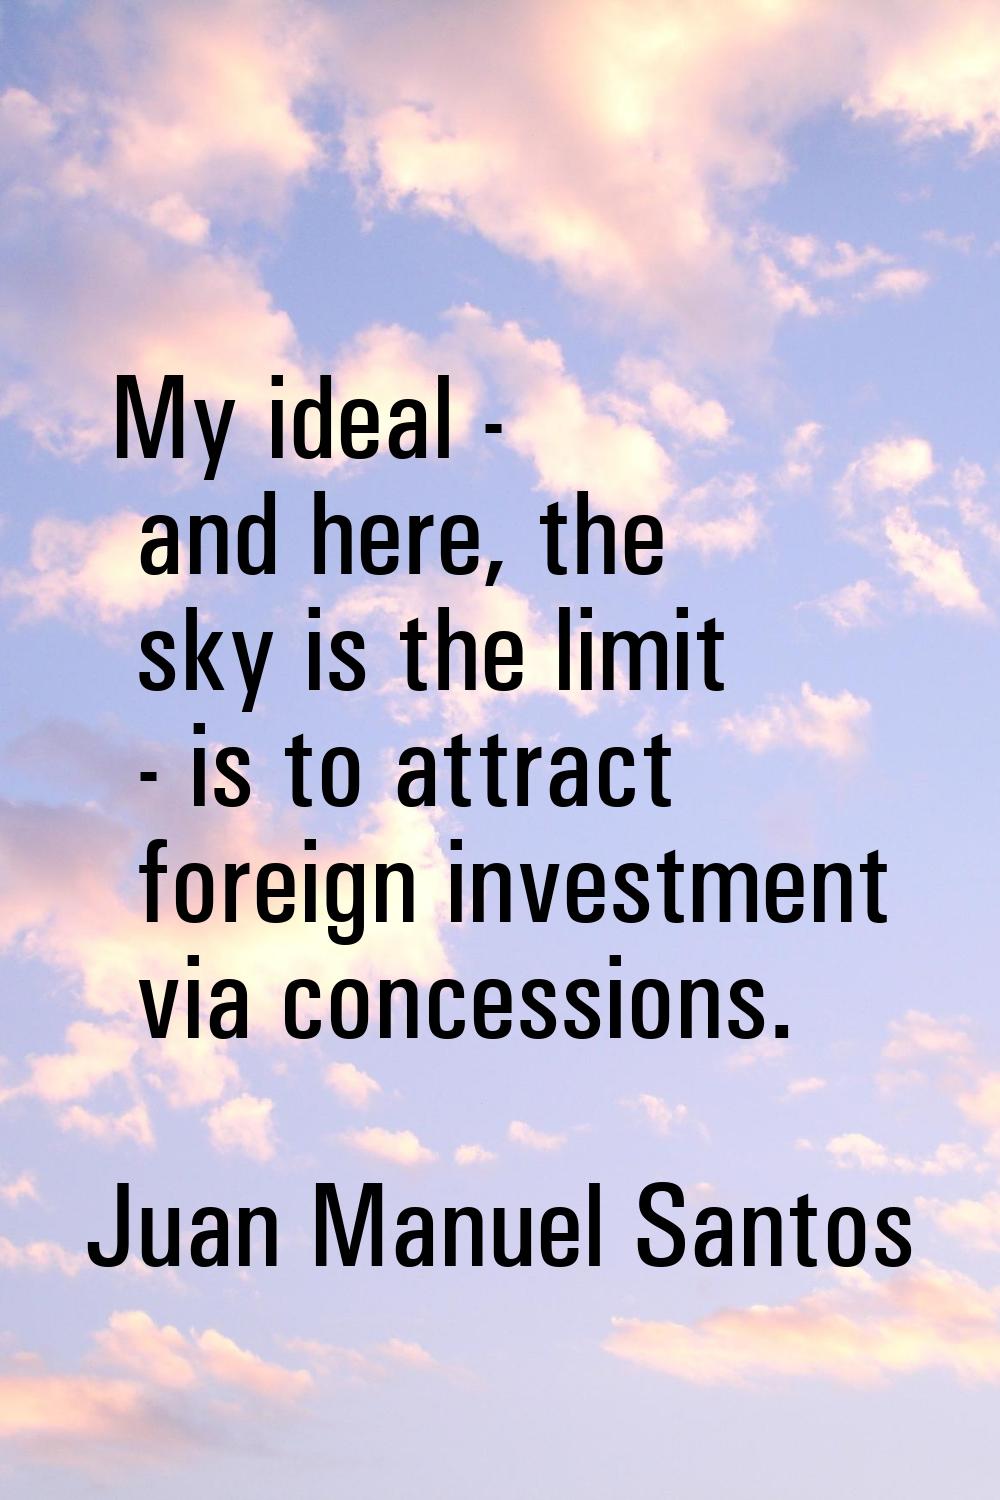 My ideal - and here, the sky is the limit - is to attract foreign investment via concessions.